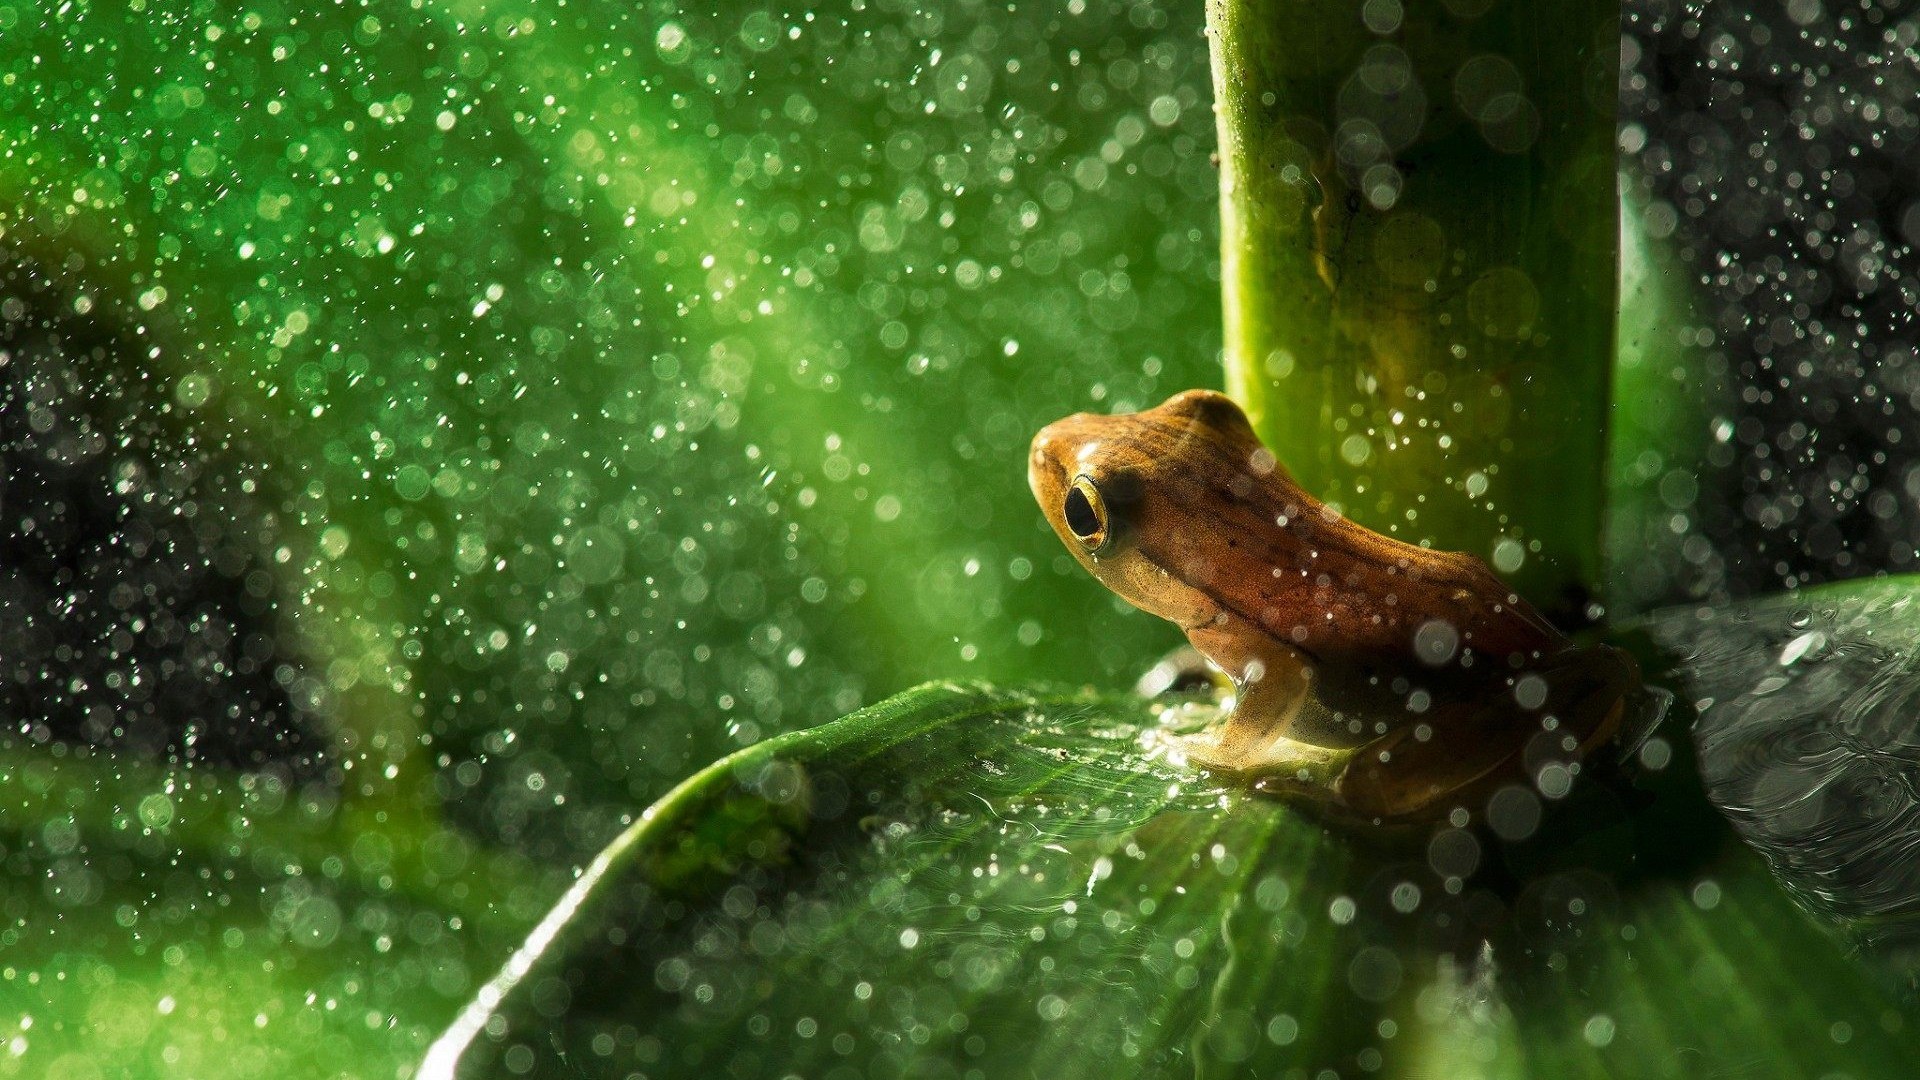 Cute Frog Wallpaper For Iphone